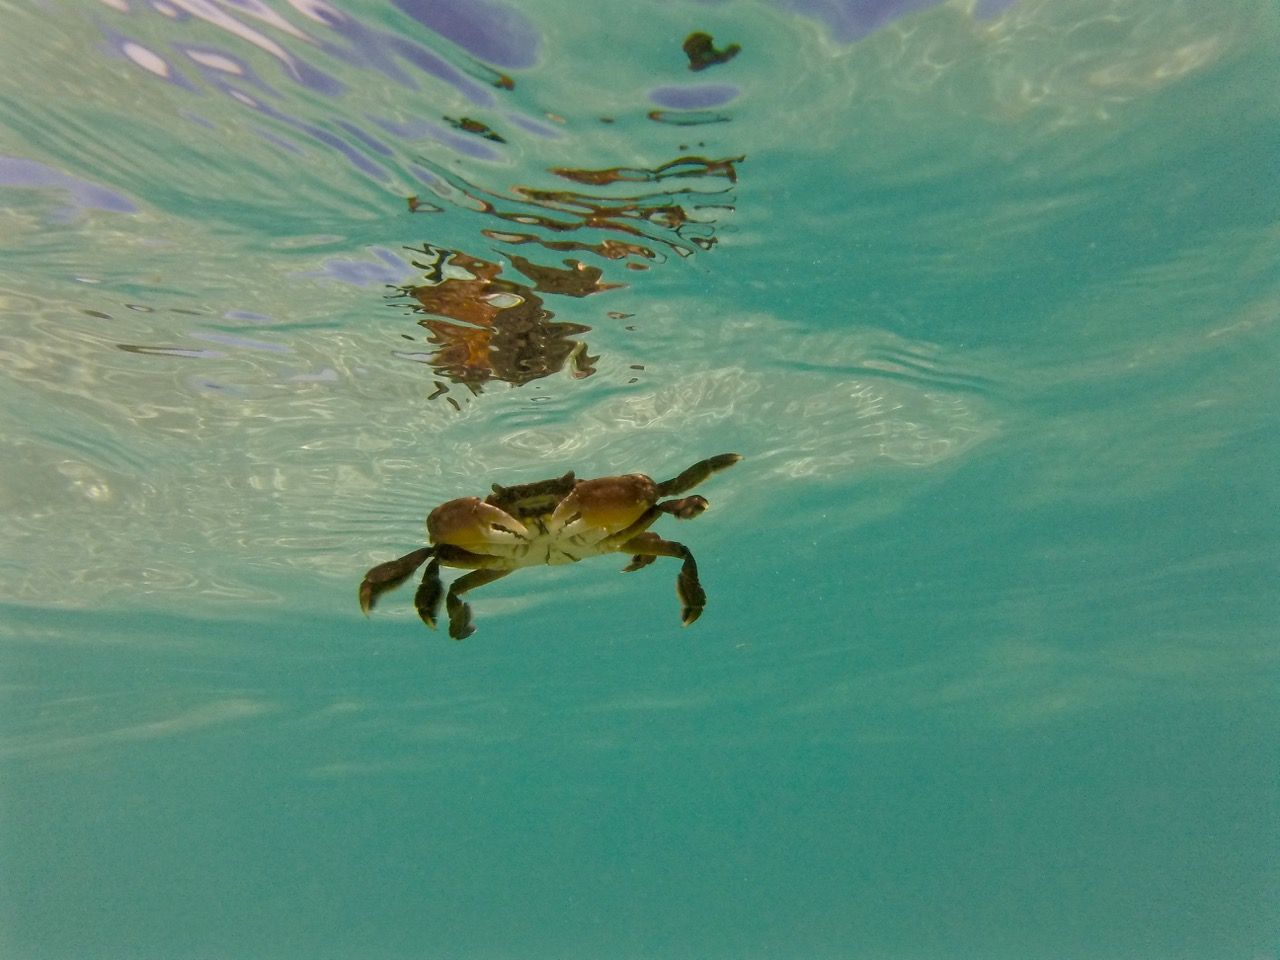 Crab swimming in water.